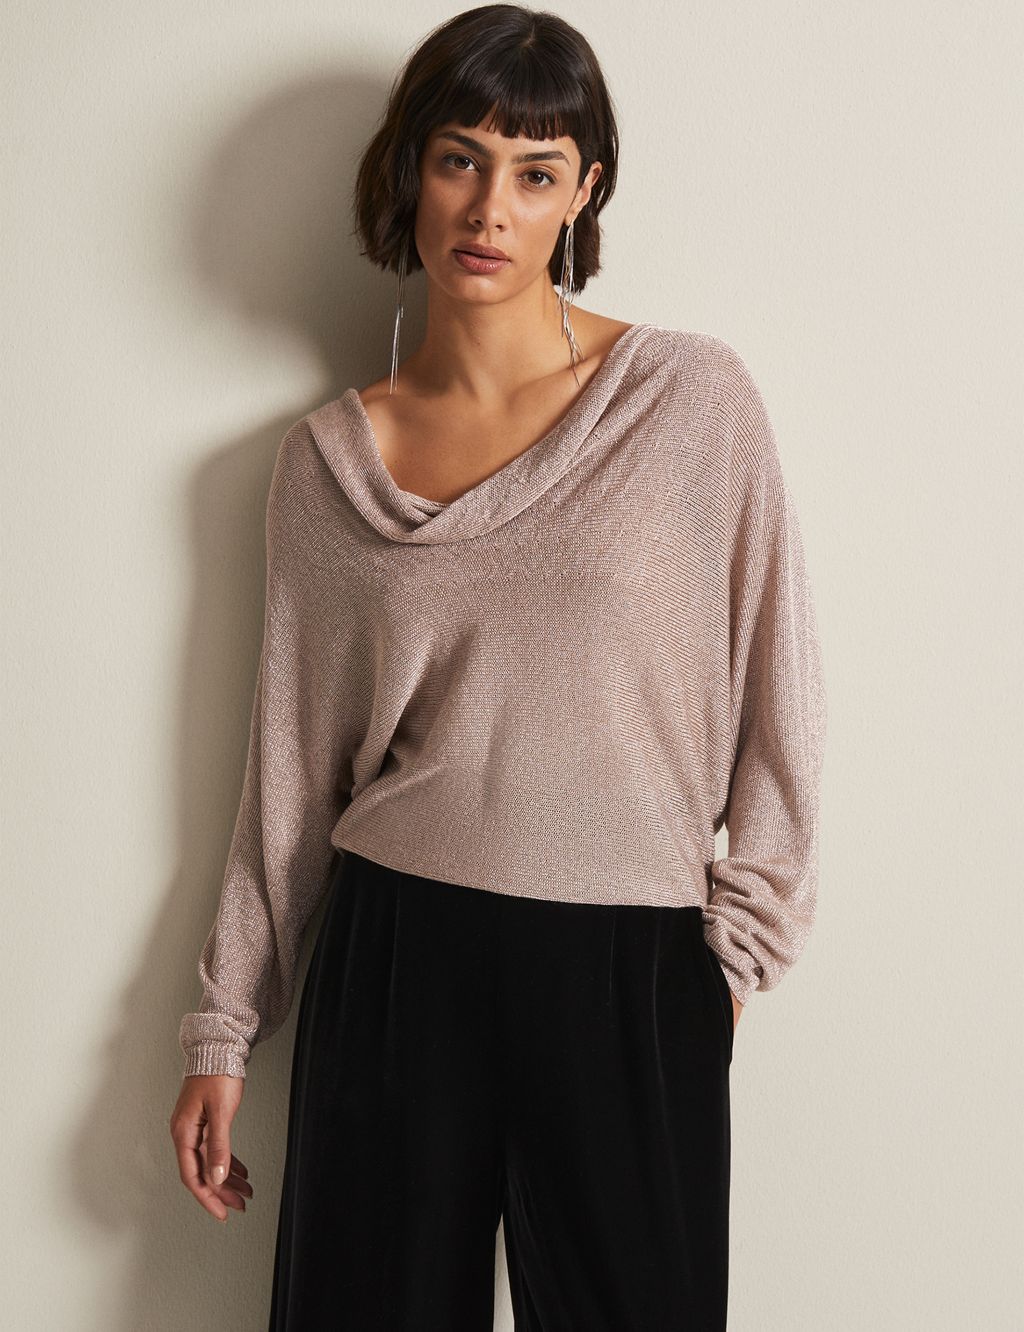 Metallic Cowl Neck Relaxed Knitted Top image 1